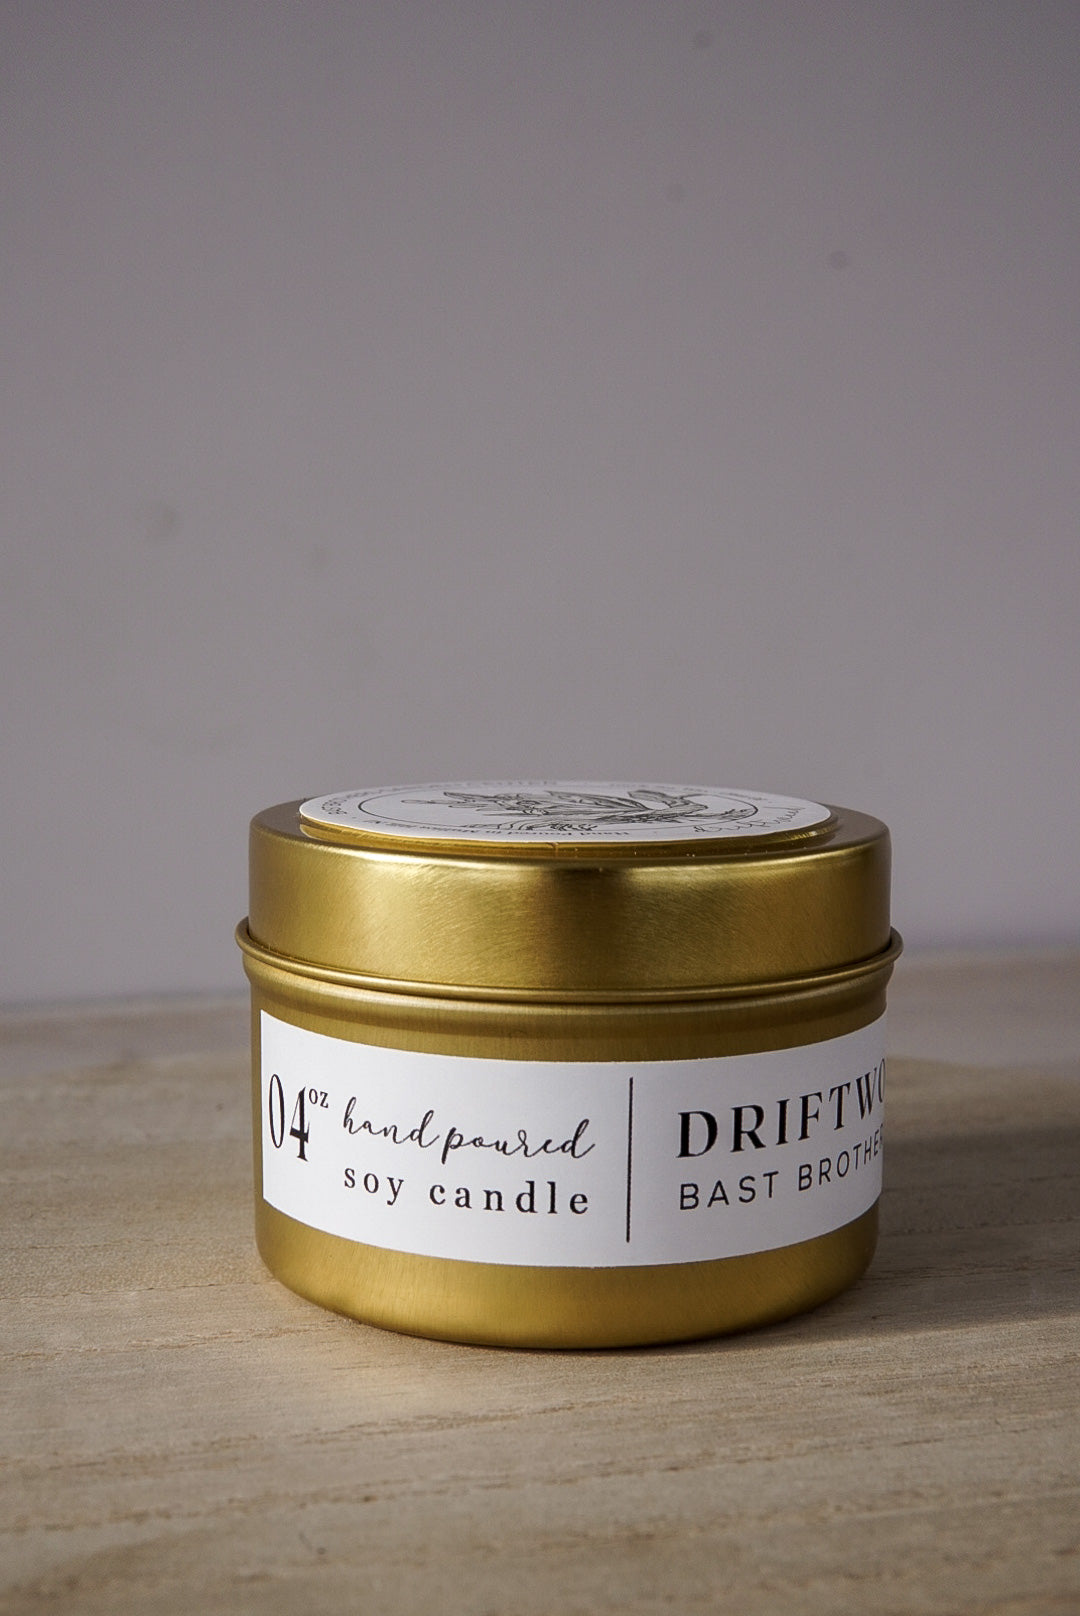 04 Ounce Driftwood Tin Candle